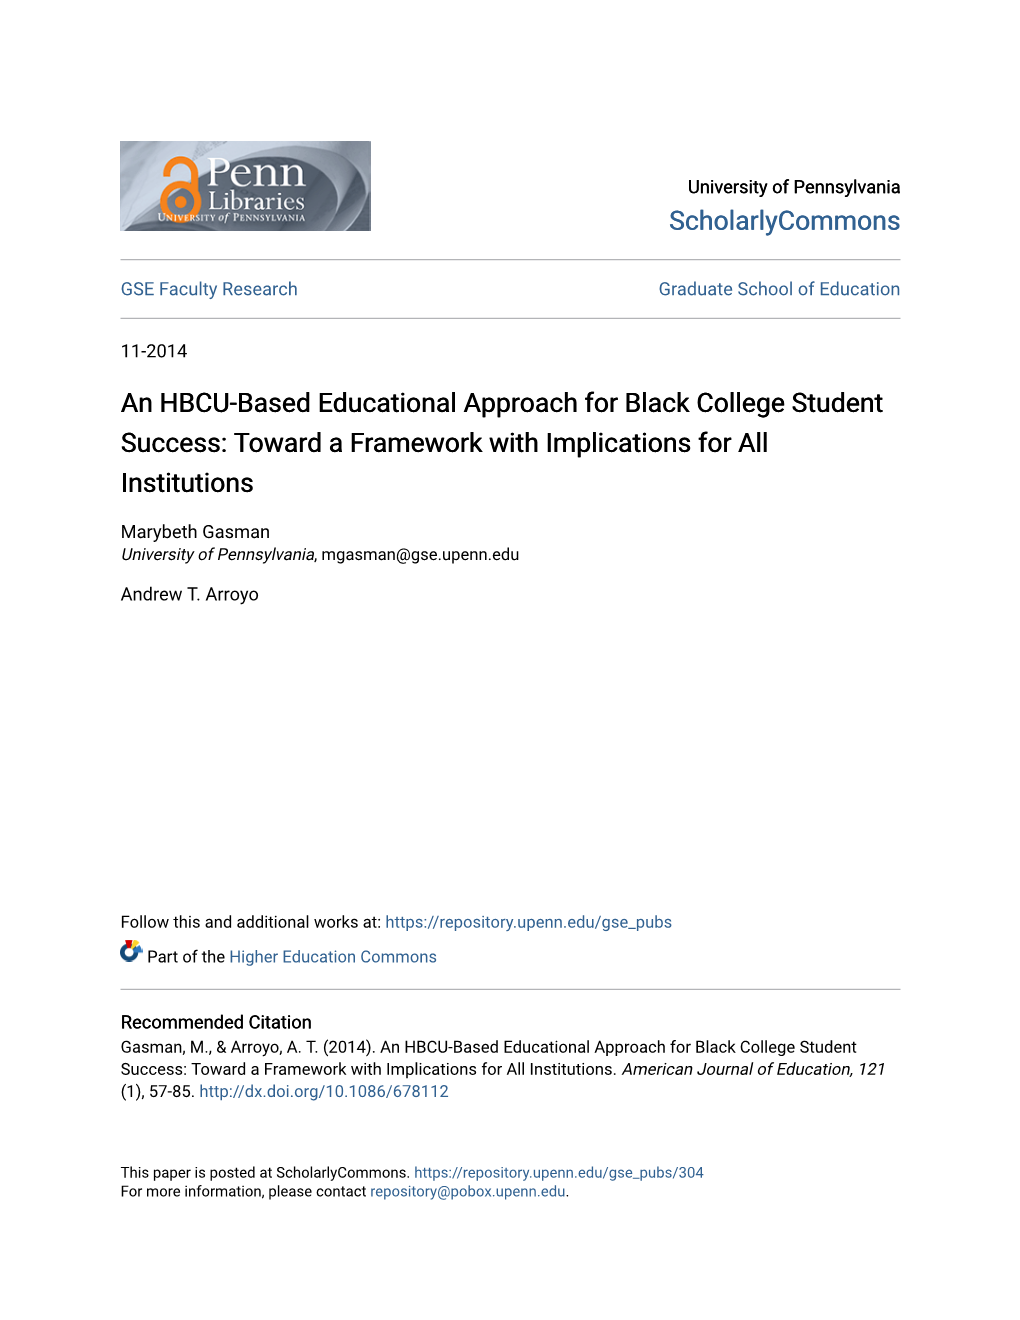 An HBCU-Based Educational Approach for Black College Student Success: Toward a Framework with Implications for All Institutions